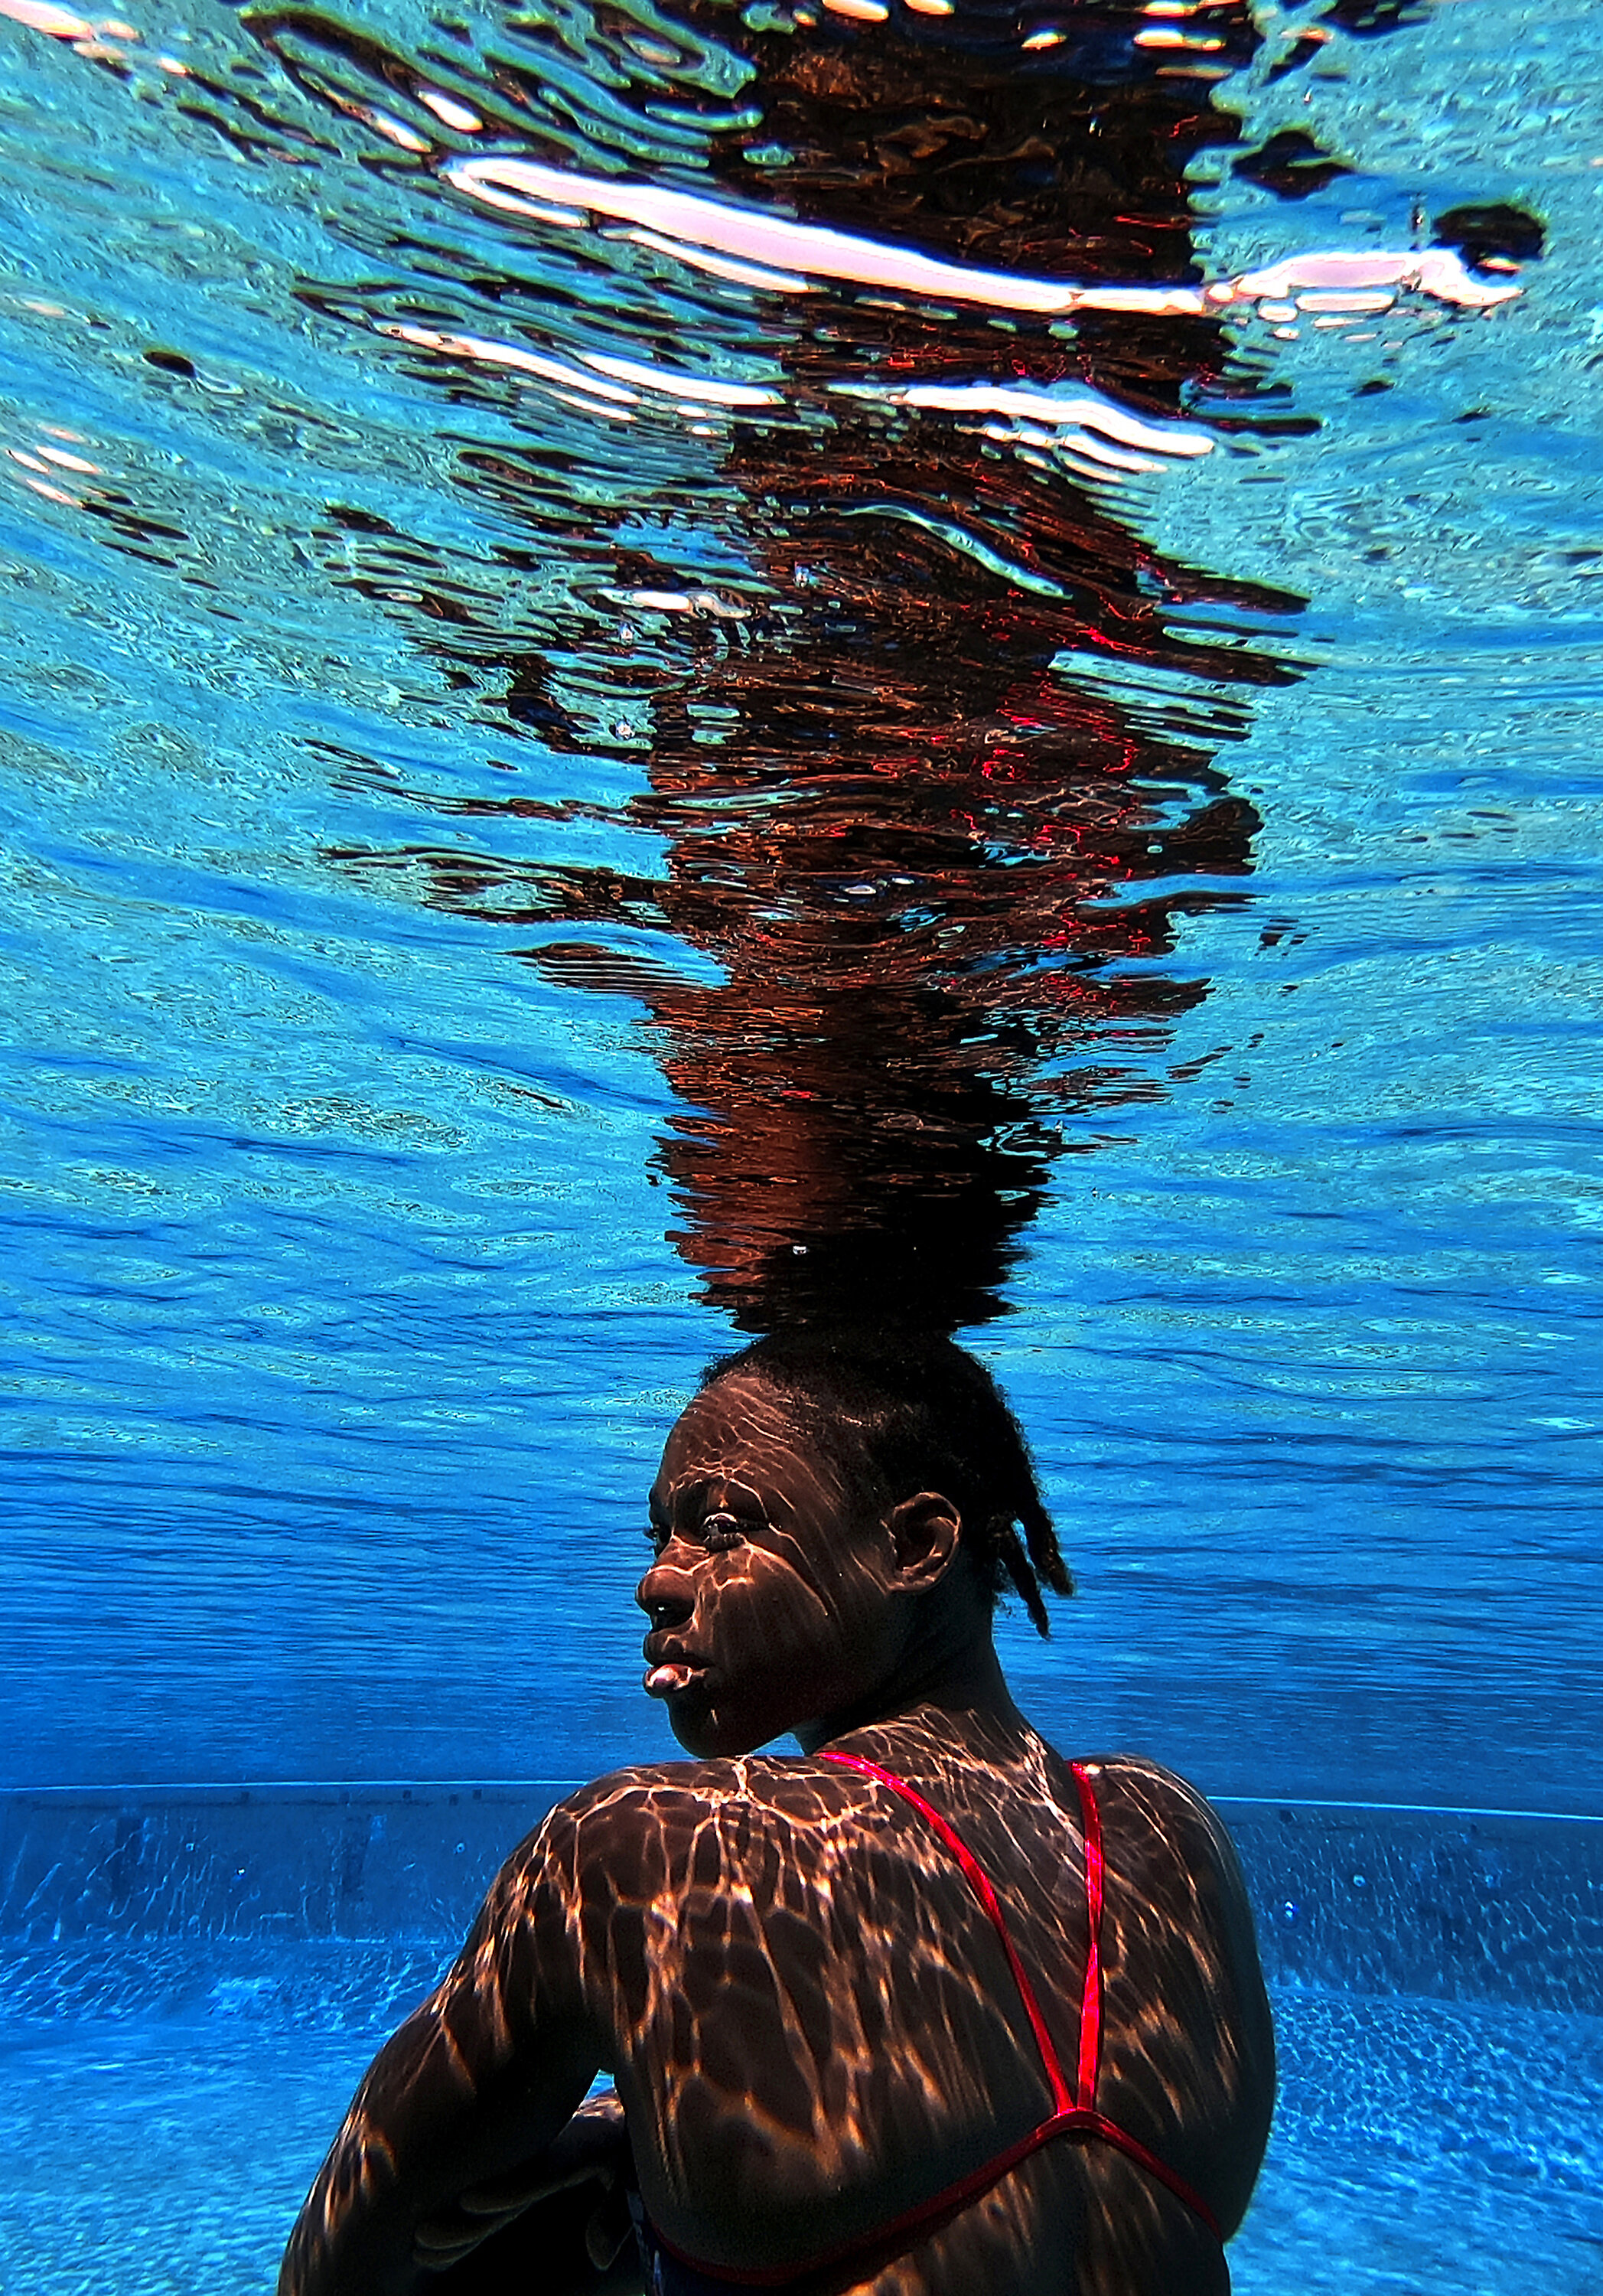  Ashleigh Johnson is photographed at the Joint Forces Training Base in Los Alamitos, California where she trains with the U.S. women's water polo team. Johnson hopes to draw more Black women to aquatics. 